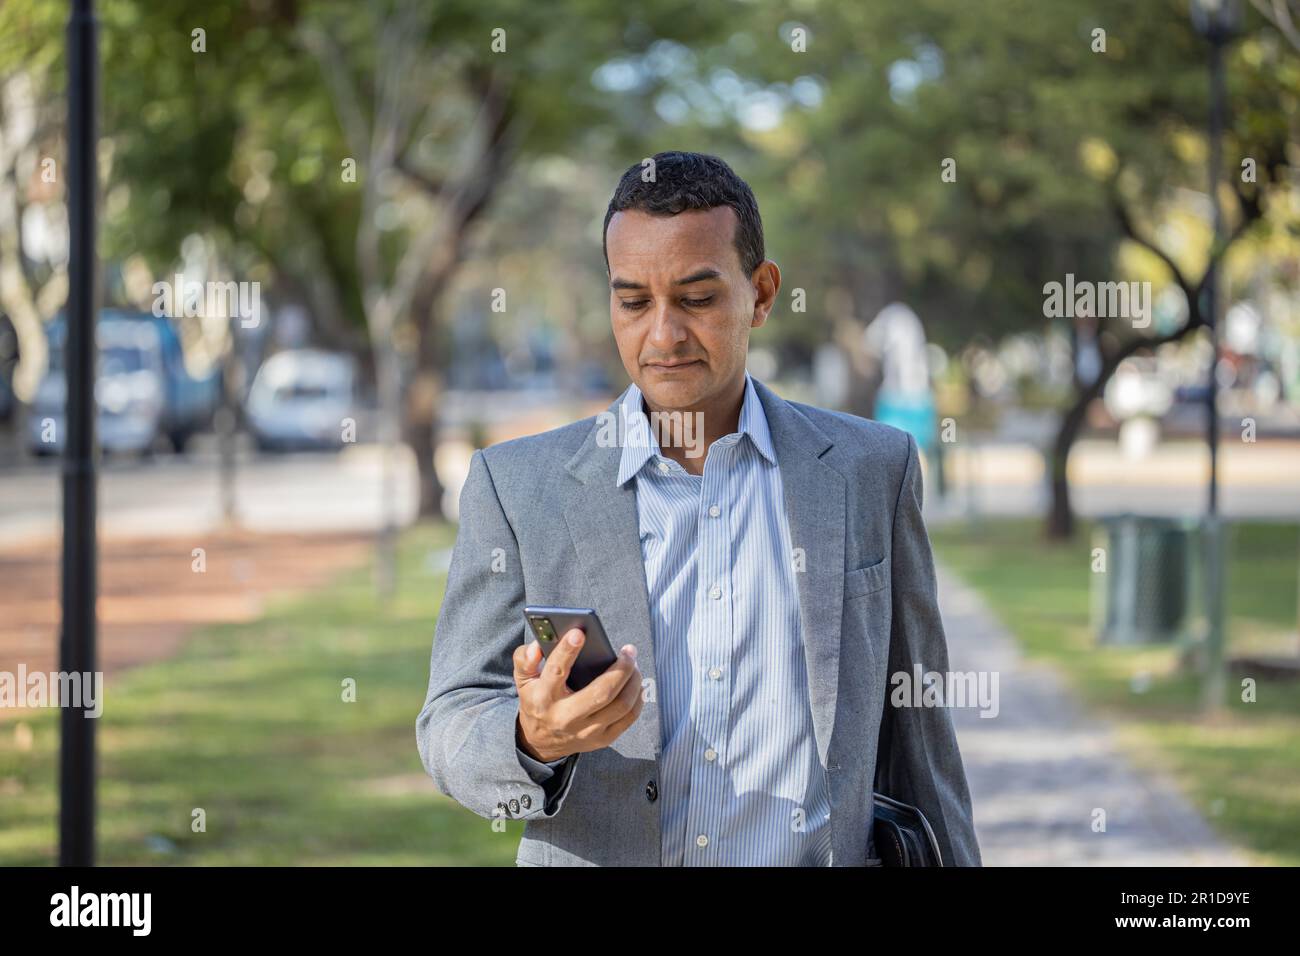 Young latin man in suit walking with mobile phone in hand with copy space. Stock Photo